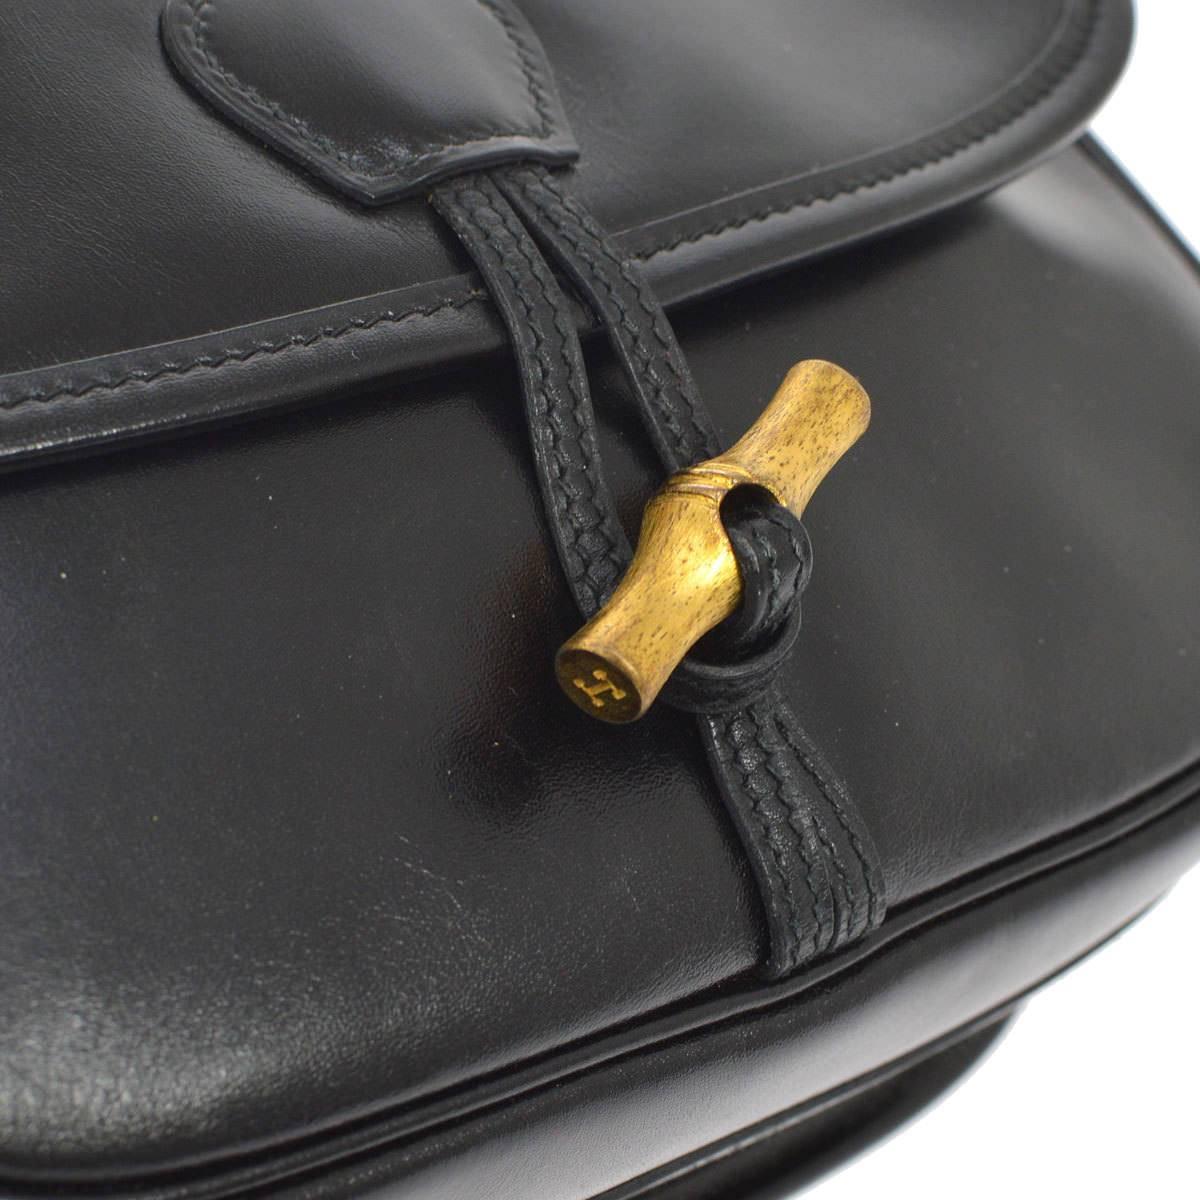 Leather
Leather lining
Gold tone hardware
Toggle closure
Date code present
Made in France
Shoulder strap drop 16-18.5